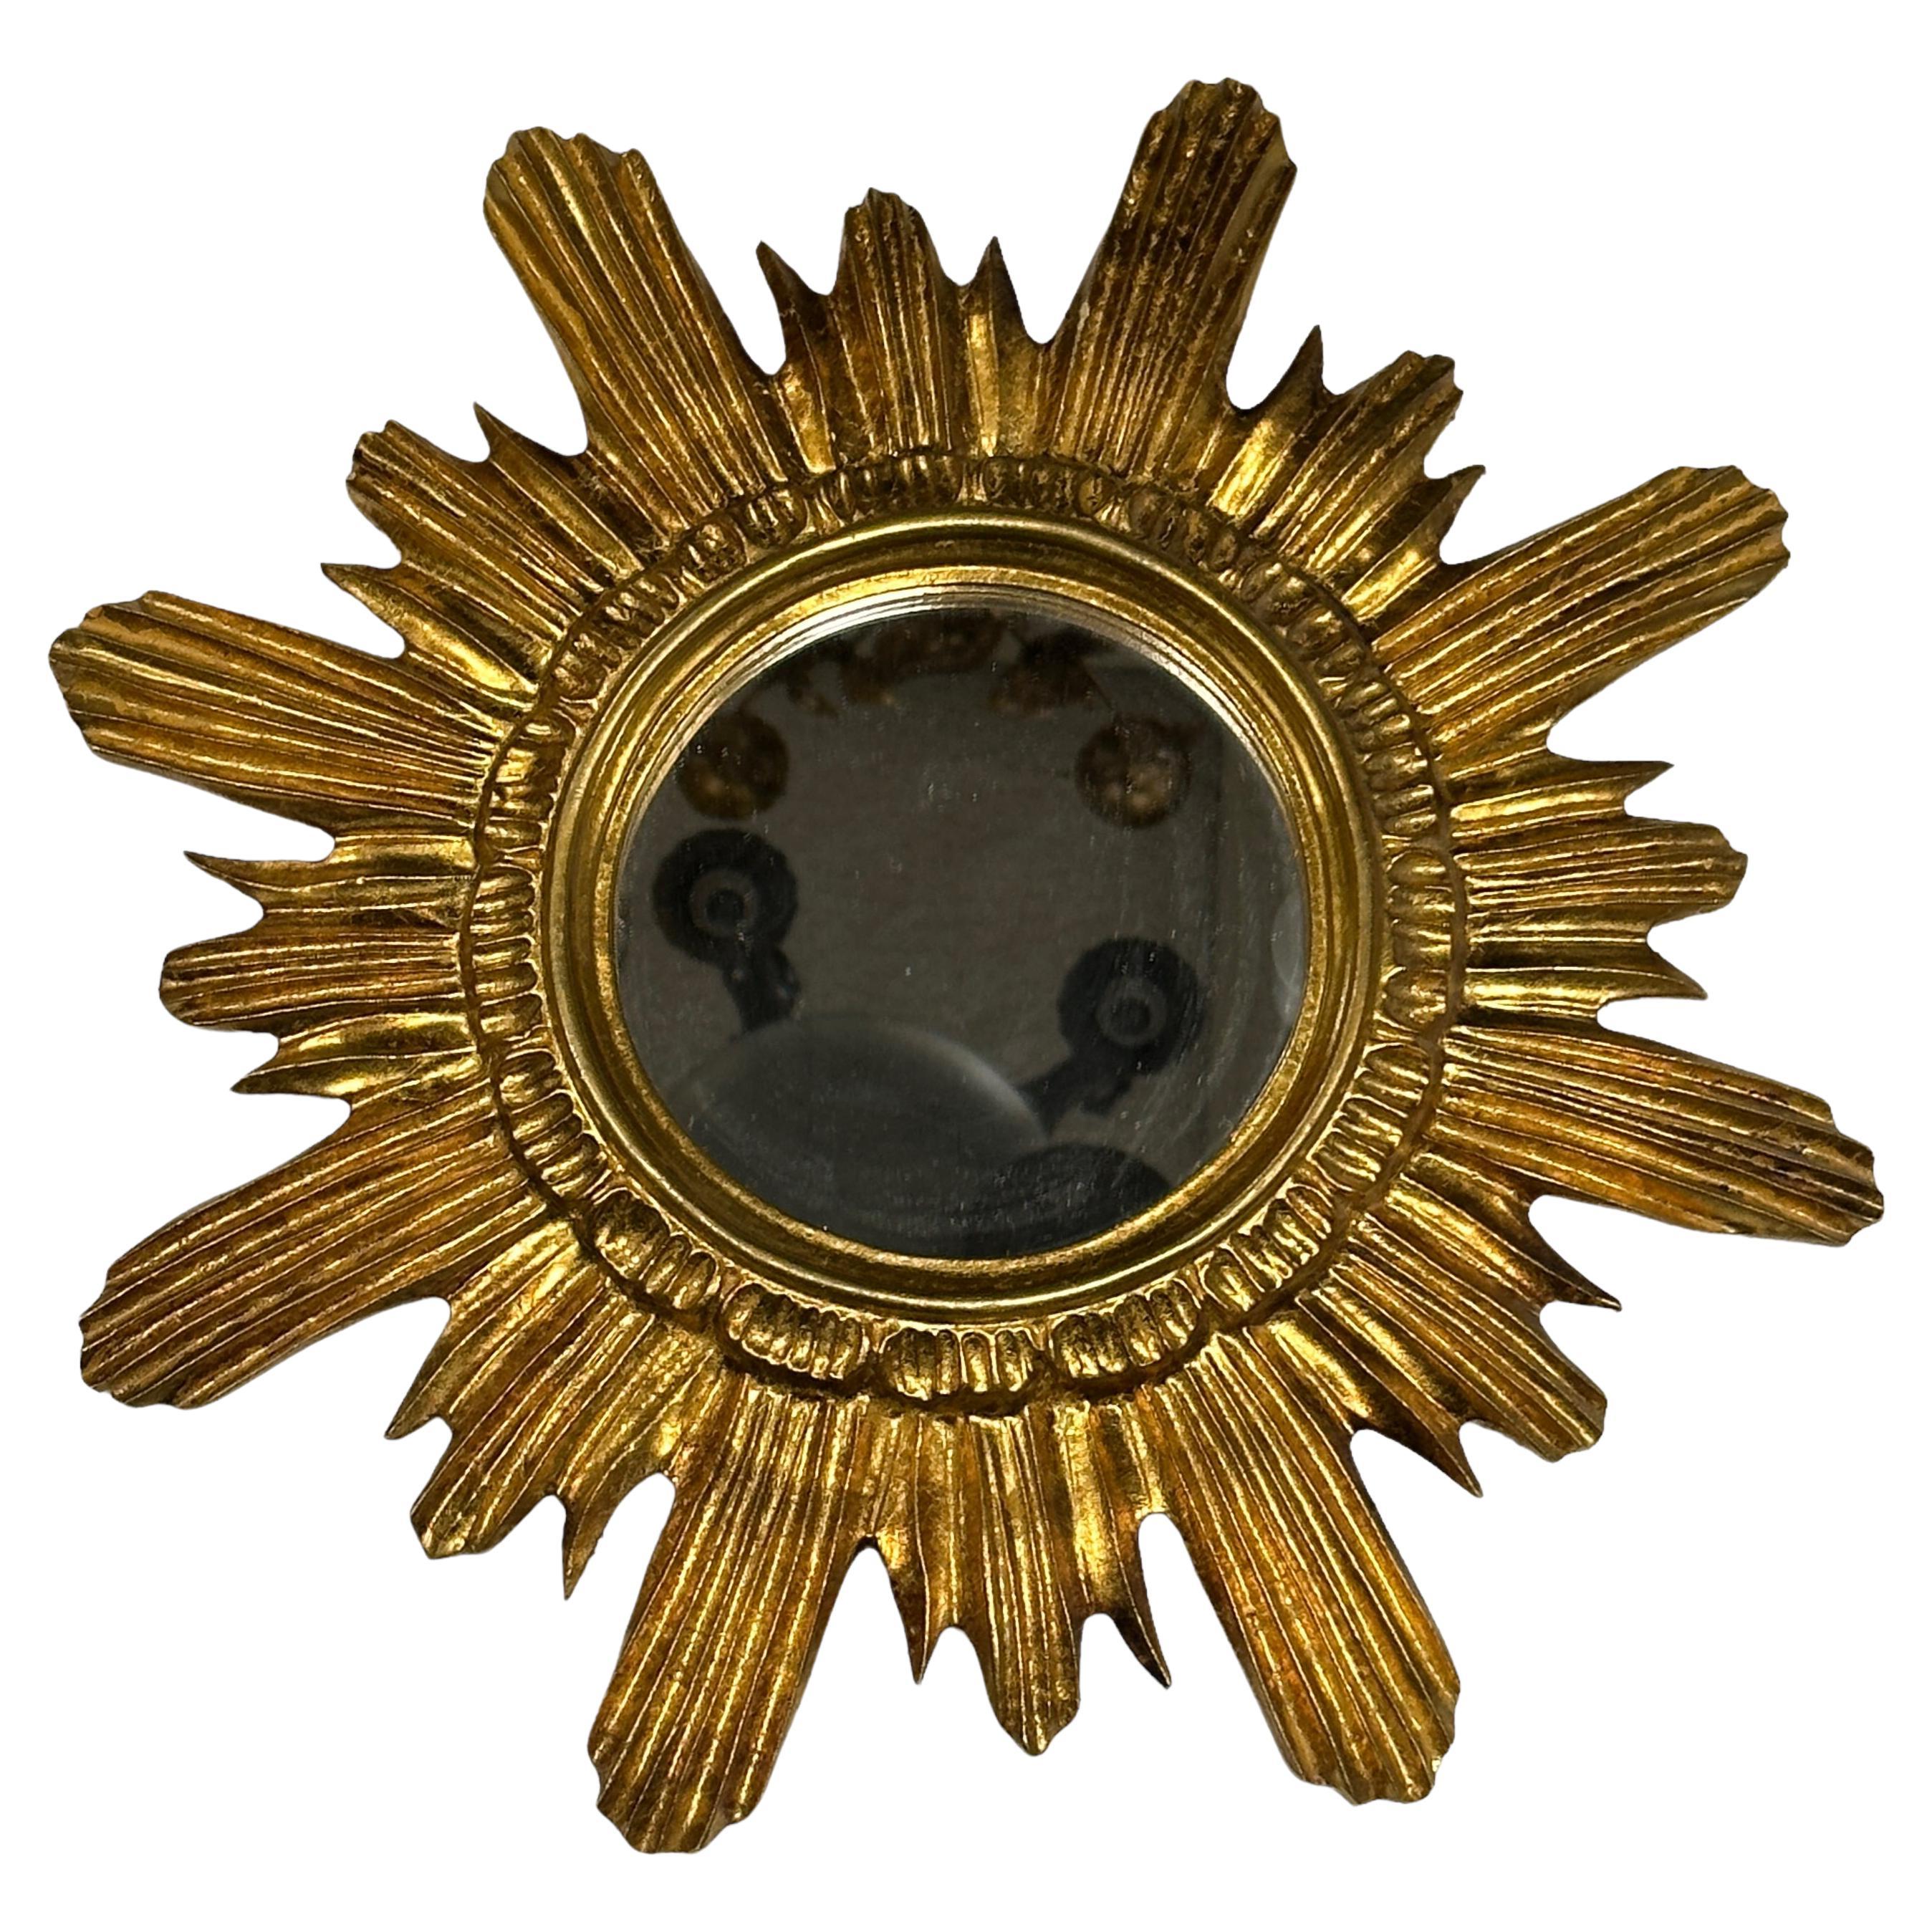 A gorgeous starburst mirror. Made of gilded wood and stucco. No chips, no cracks, no repairs. It measures approximate: 16.5